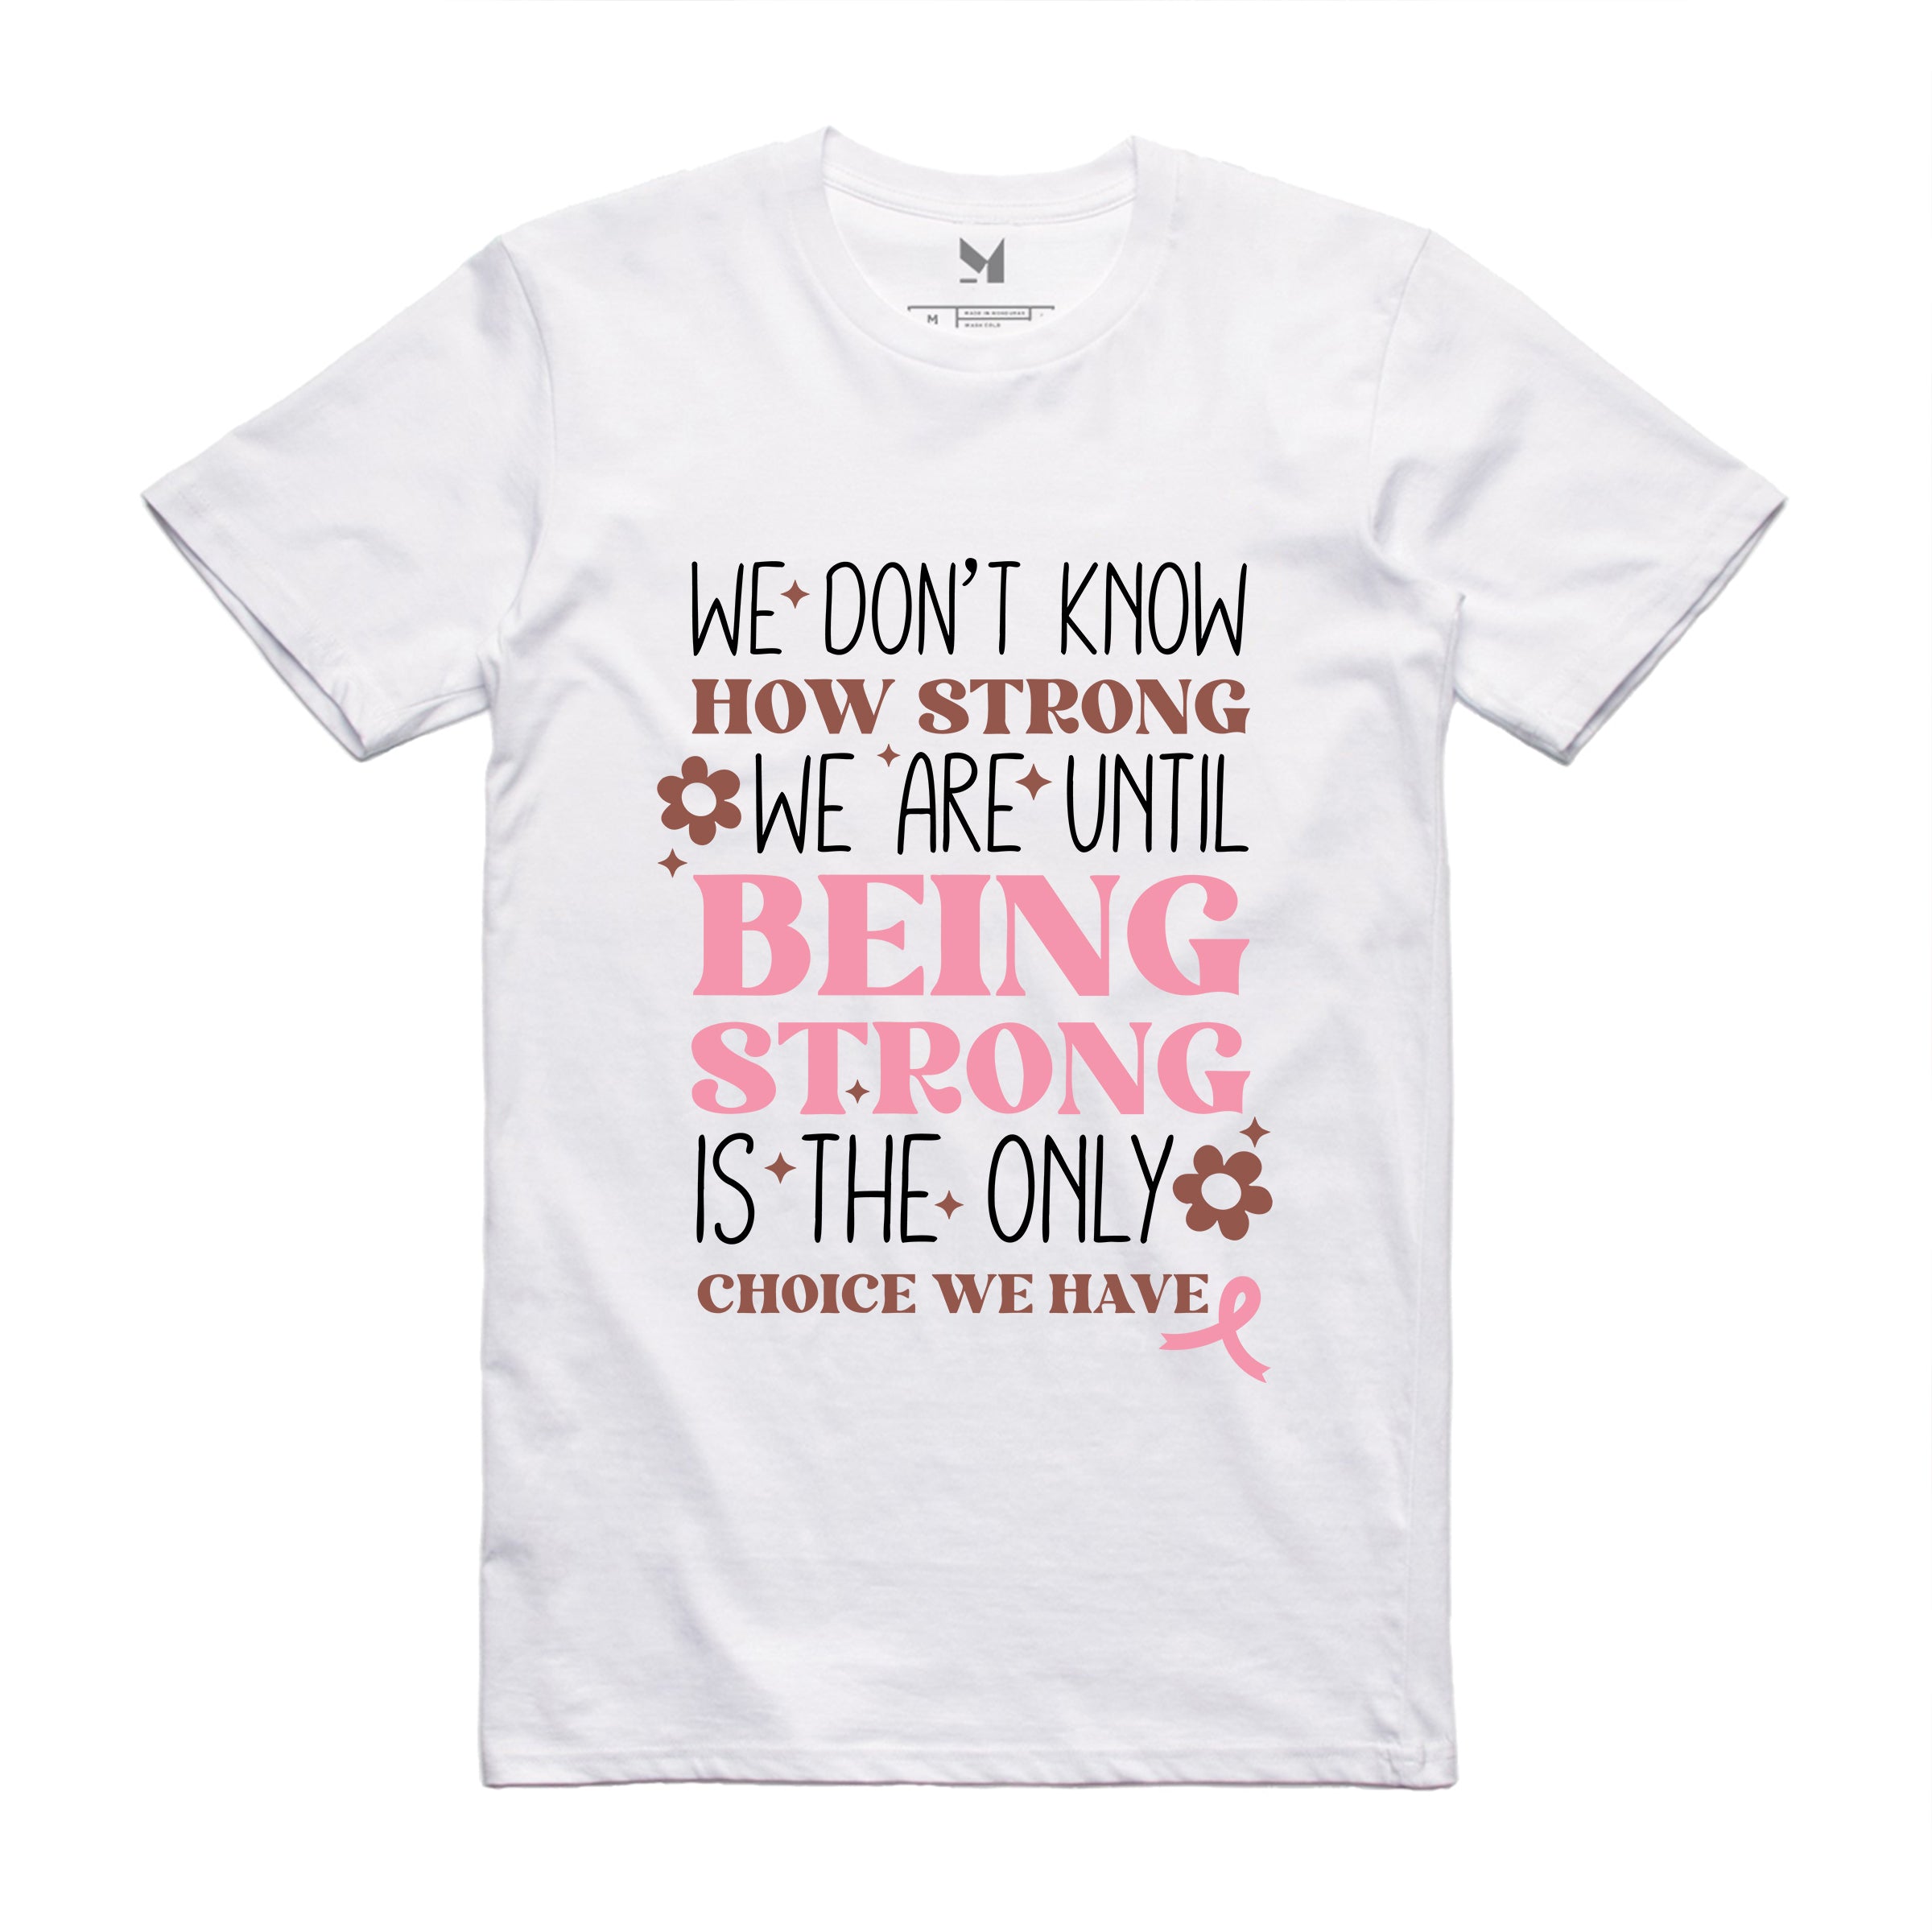 HOW STRONG WE ARE TSHIRT A028